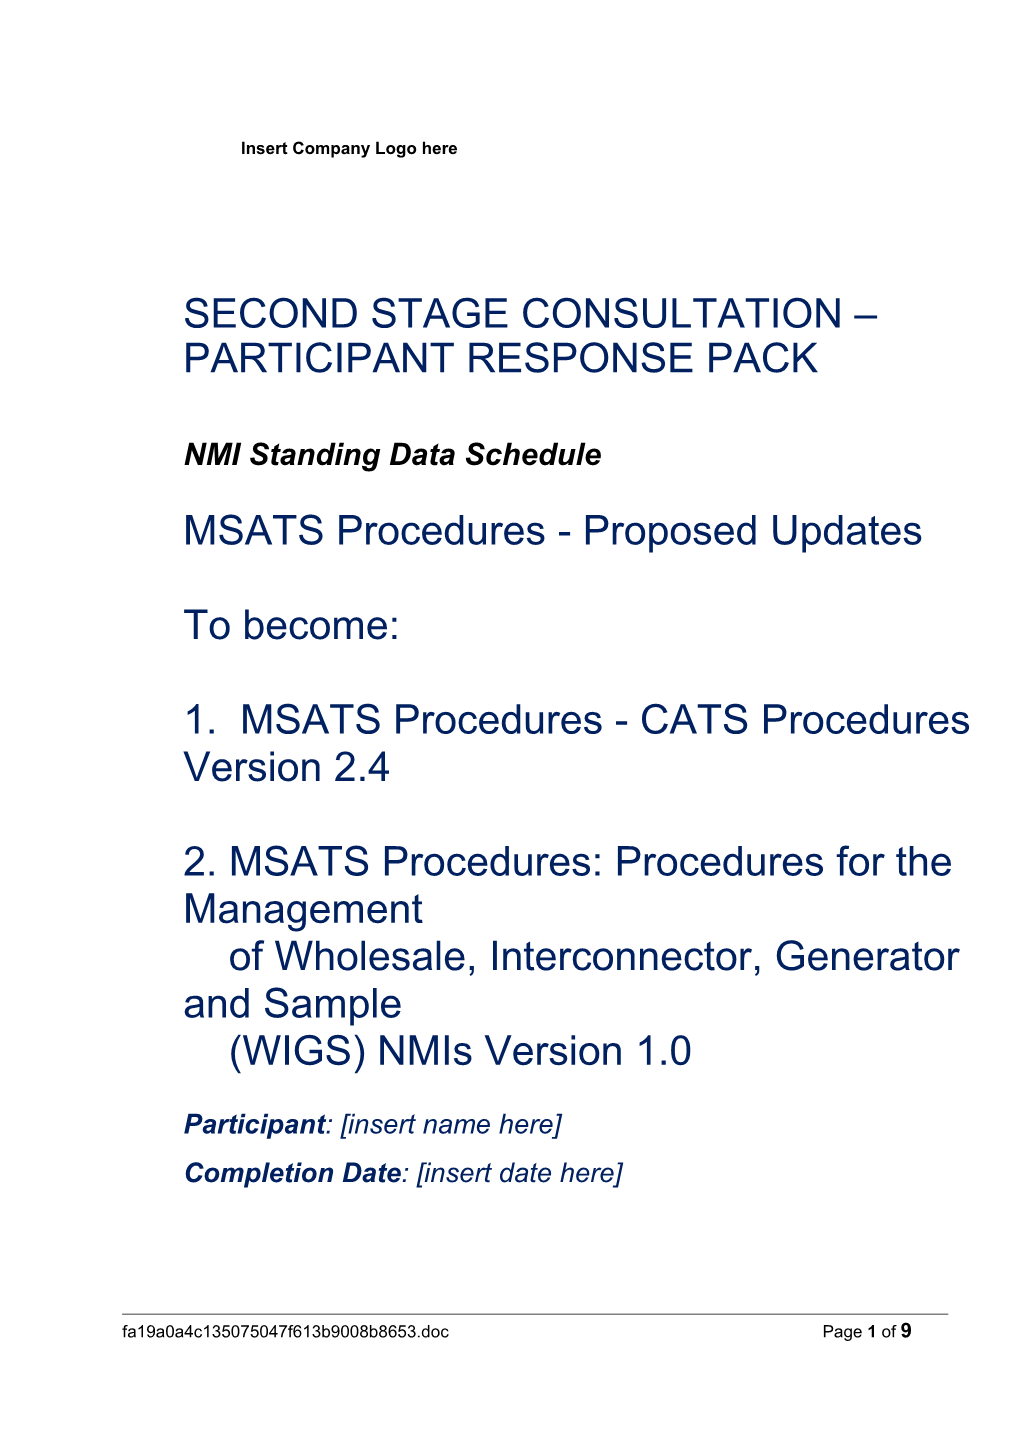 Second Stage Participant Response Pack - NMI Standing Data Schedule